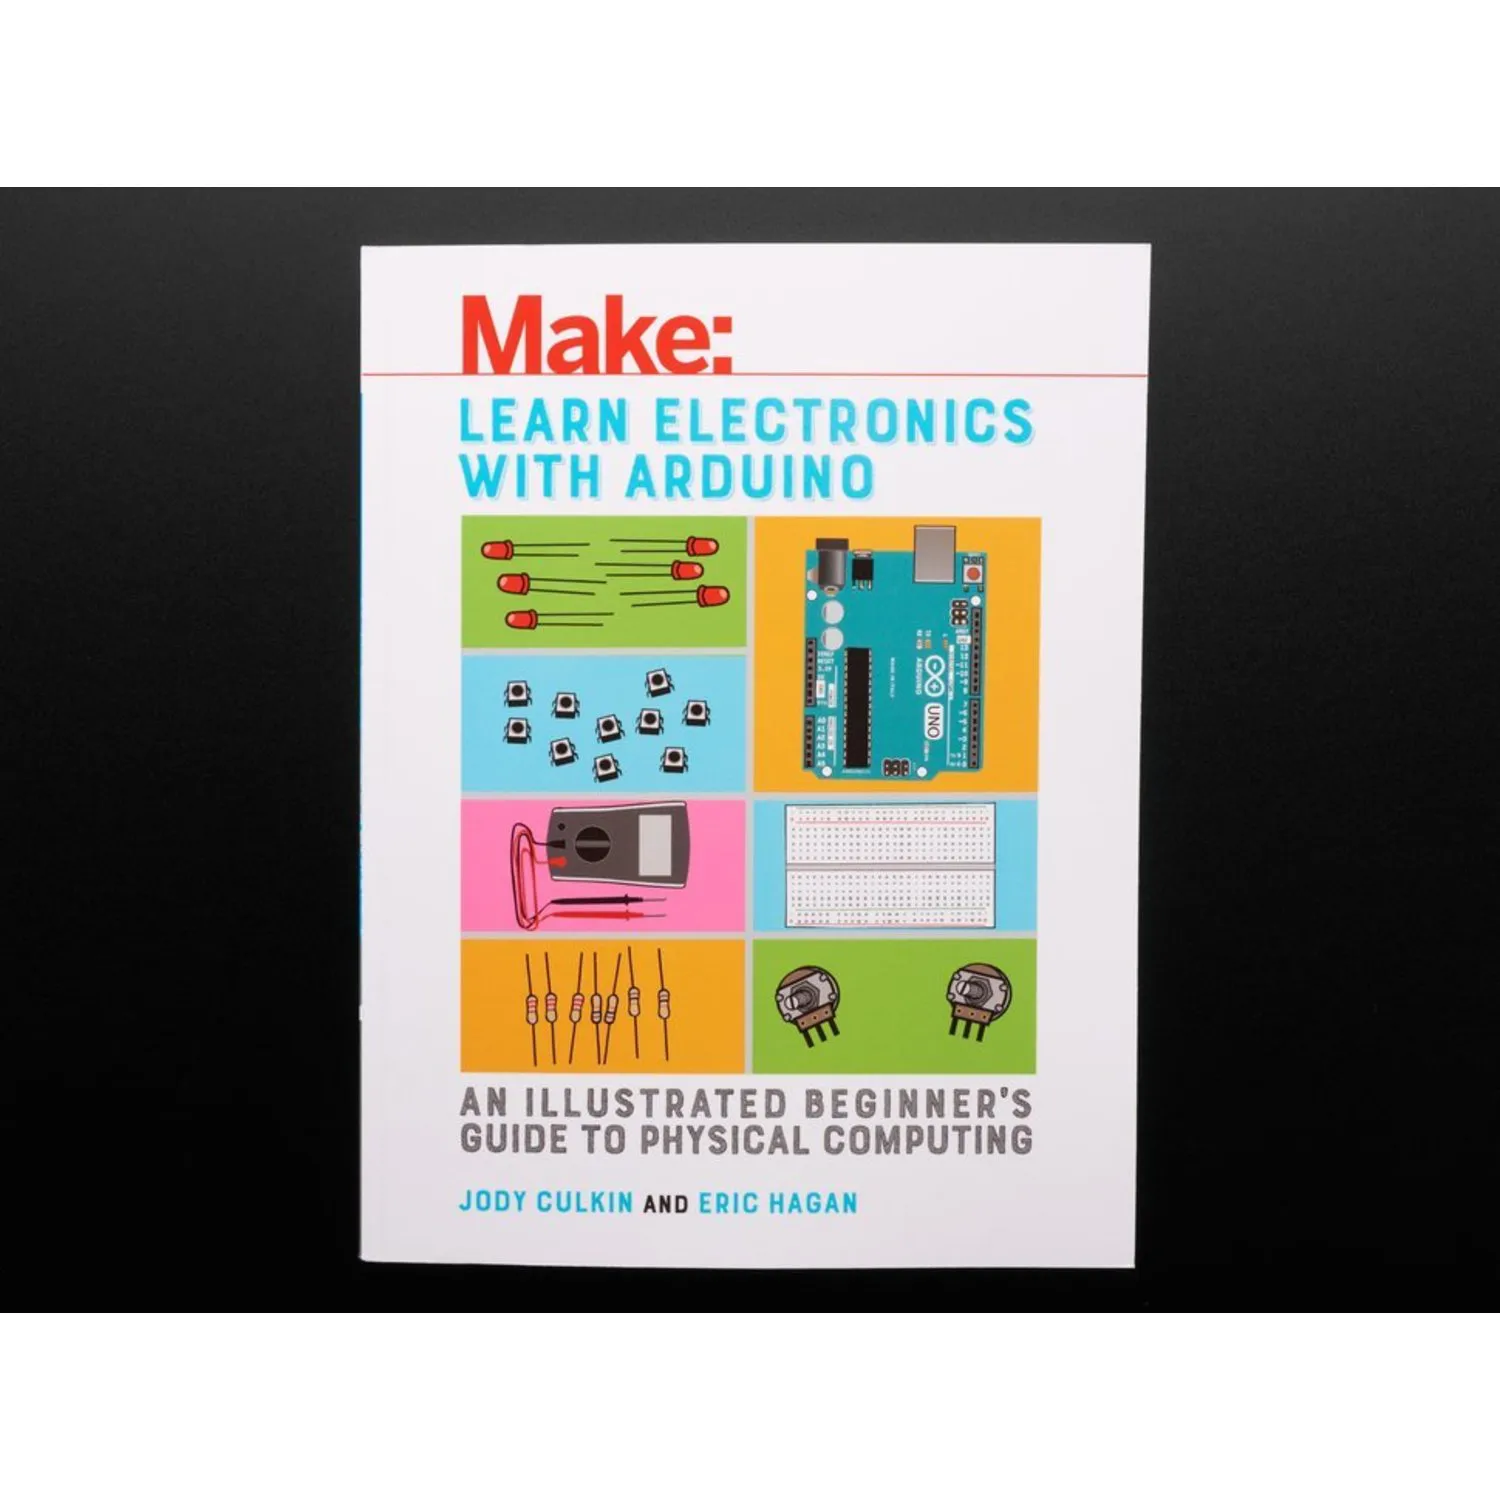 Photo of Learn Electronics with Arduino - by Jody Culkin and Eric Hagan